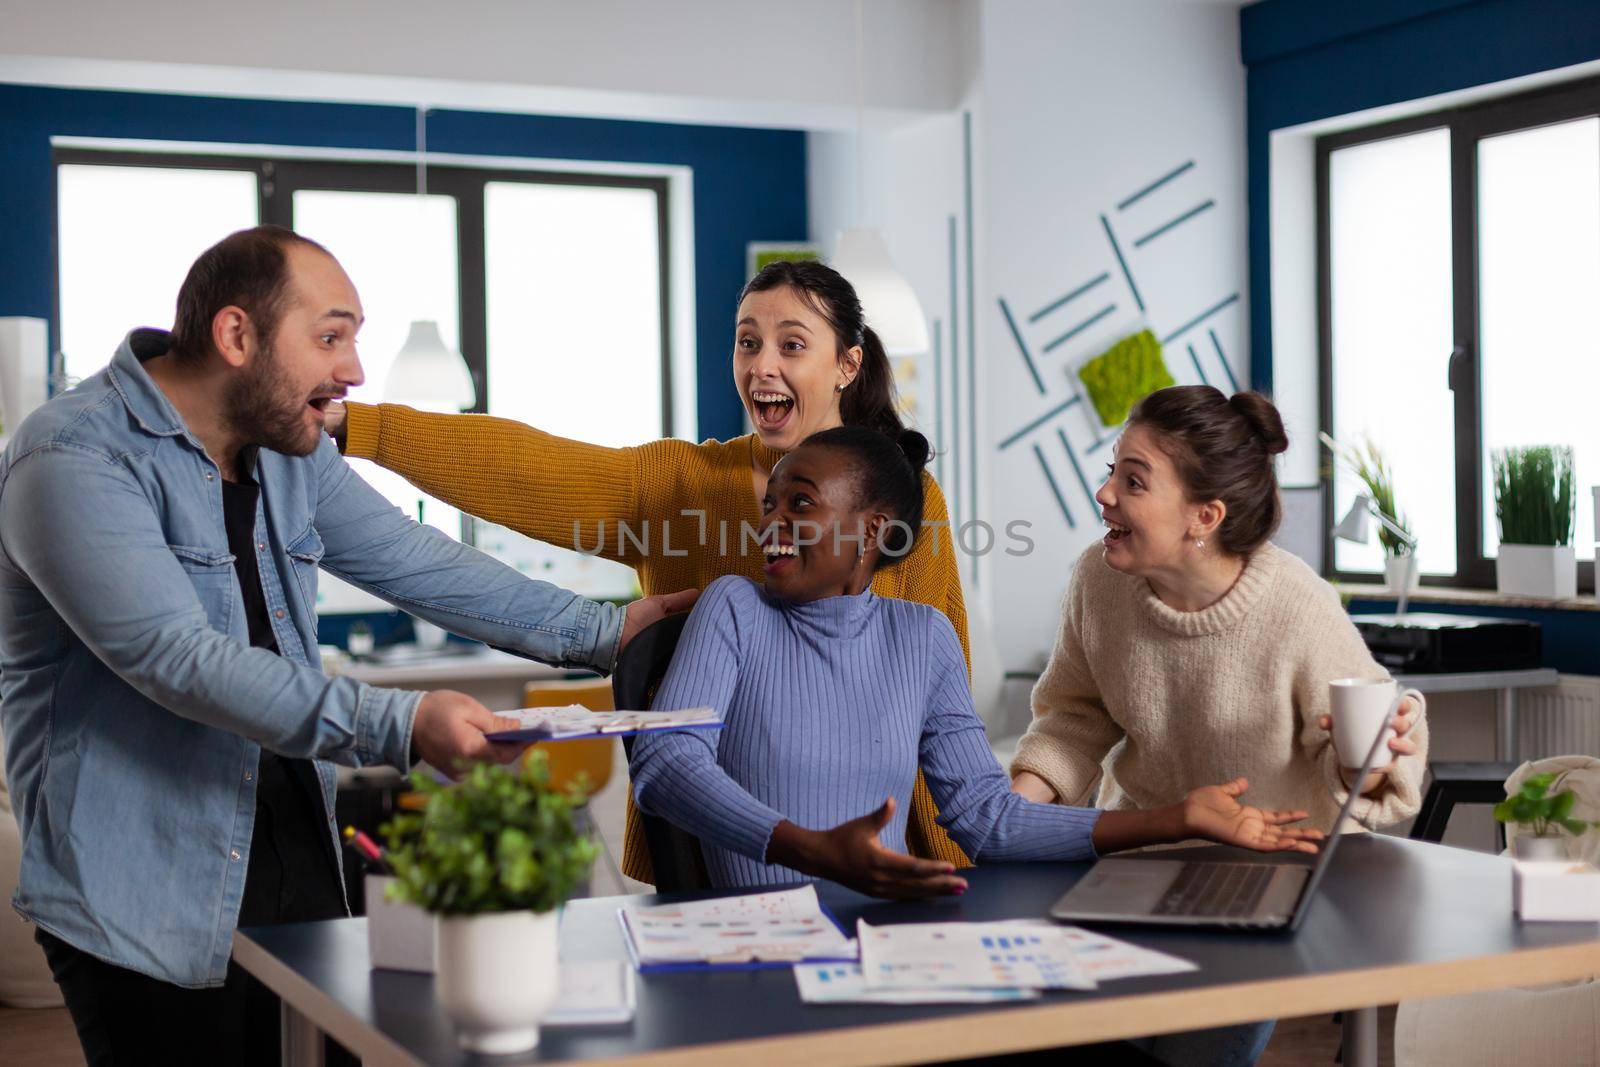 African manager and coworkers looking surprised celebrating succes of company triumph. Multiethnic diverse business team with laptop and papers excited about project.